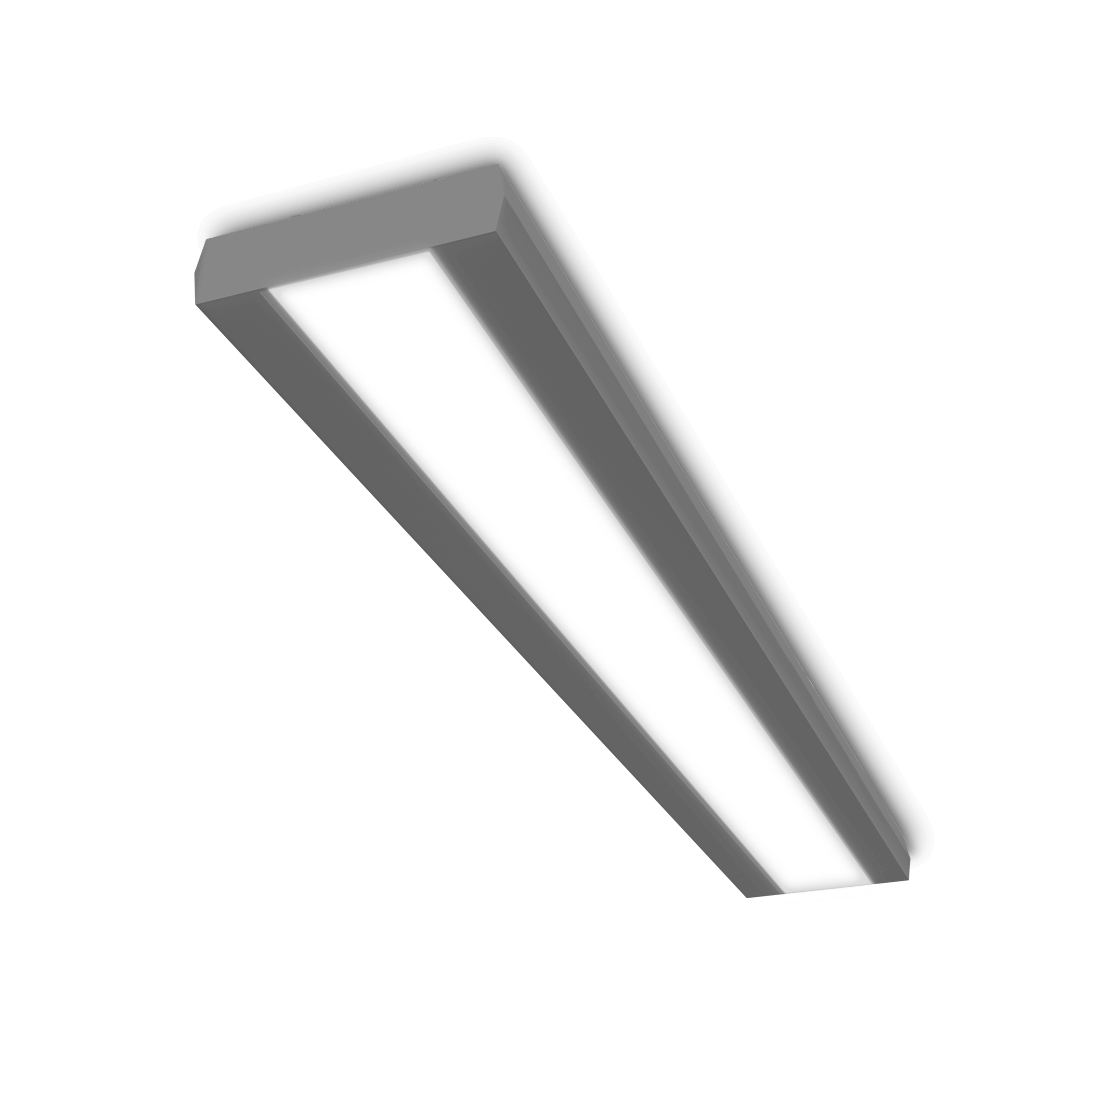 Grey low profile LED light fixture mounted to a ceiling